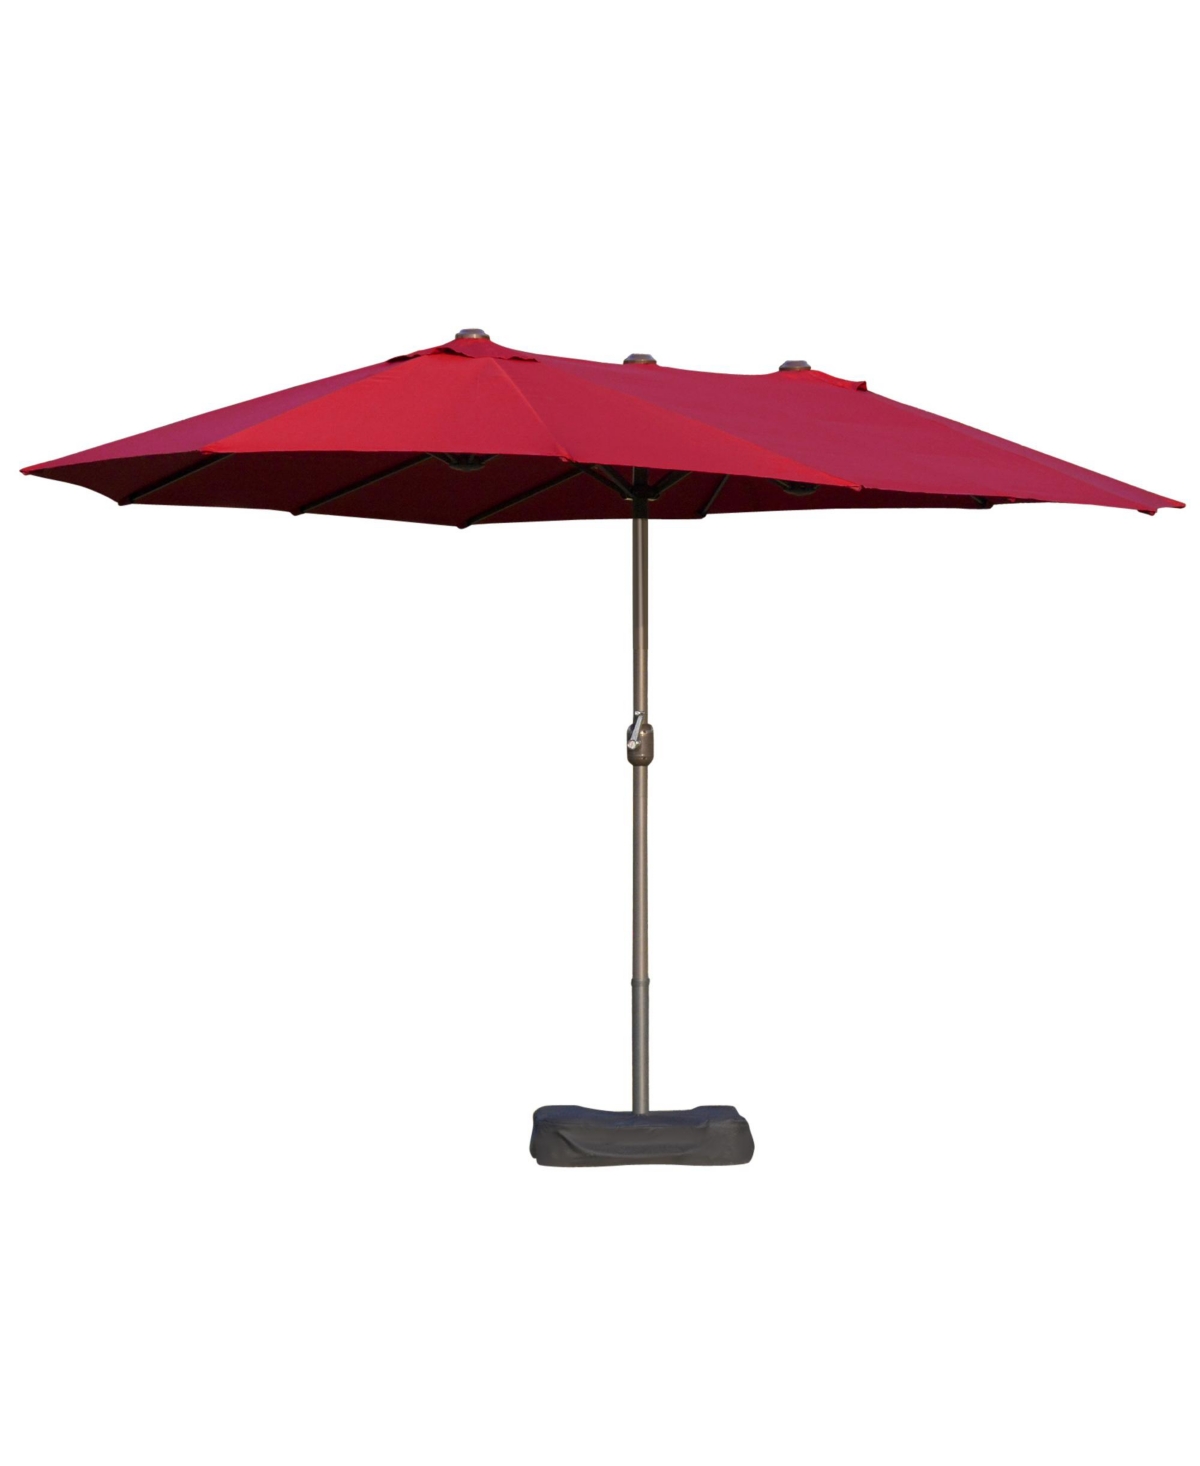 Patio Umbrella 15' Steel Rectangular Outdoor Double Sided Market with base, Uv Sun Protection & Easy Crank for Deck Pool Patio, Red - Red